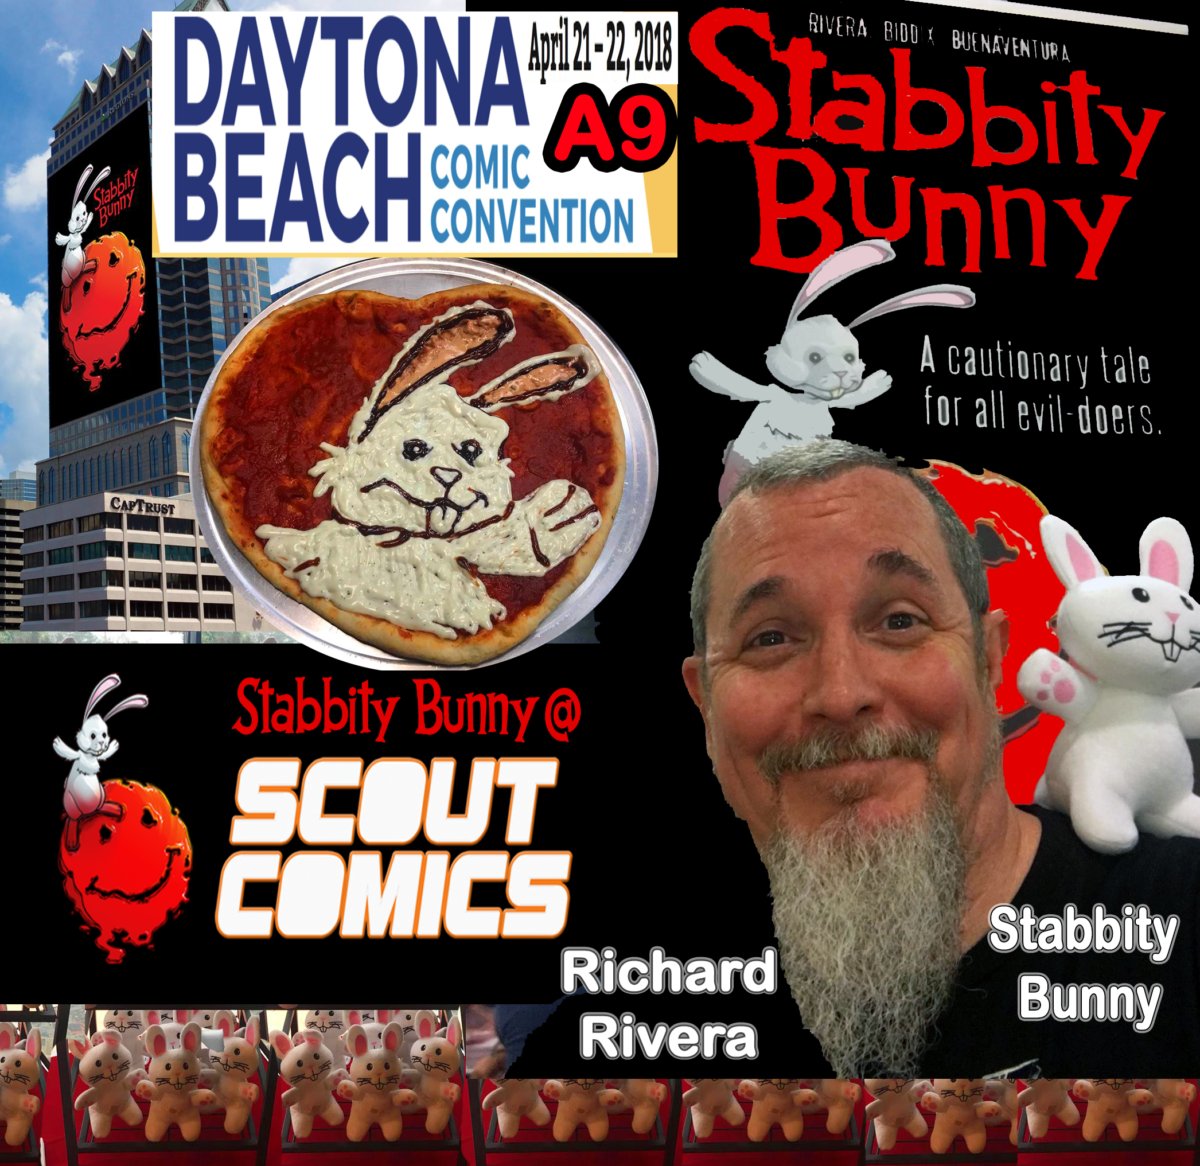 COMIC CON HIGHWAY FLORIDA EXIT gets STABBITY :: STABBITY BUNNY creator RICHARD RIVERA  and SCOUT COMICS @ Daytona Beach Comic Convention April 21st -22nd  .  .  .  .